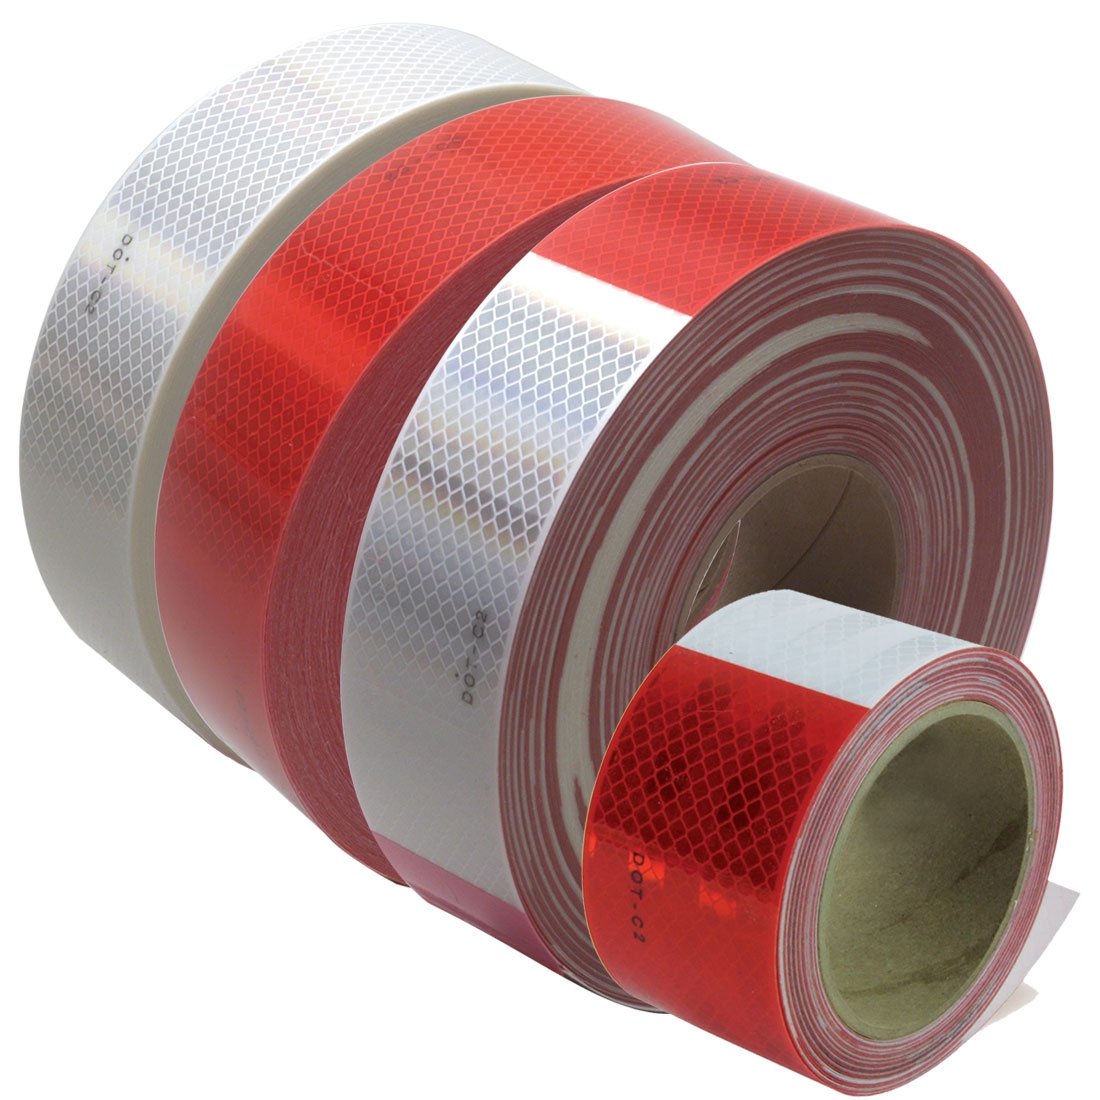 7 White Abrams 2 in x 75 ft Diamond Grade Pattern Trailer Truck Conspicuity DOT Class 2 Reflective Safety Tape 11 Red 